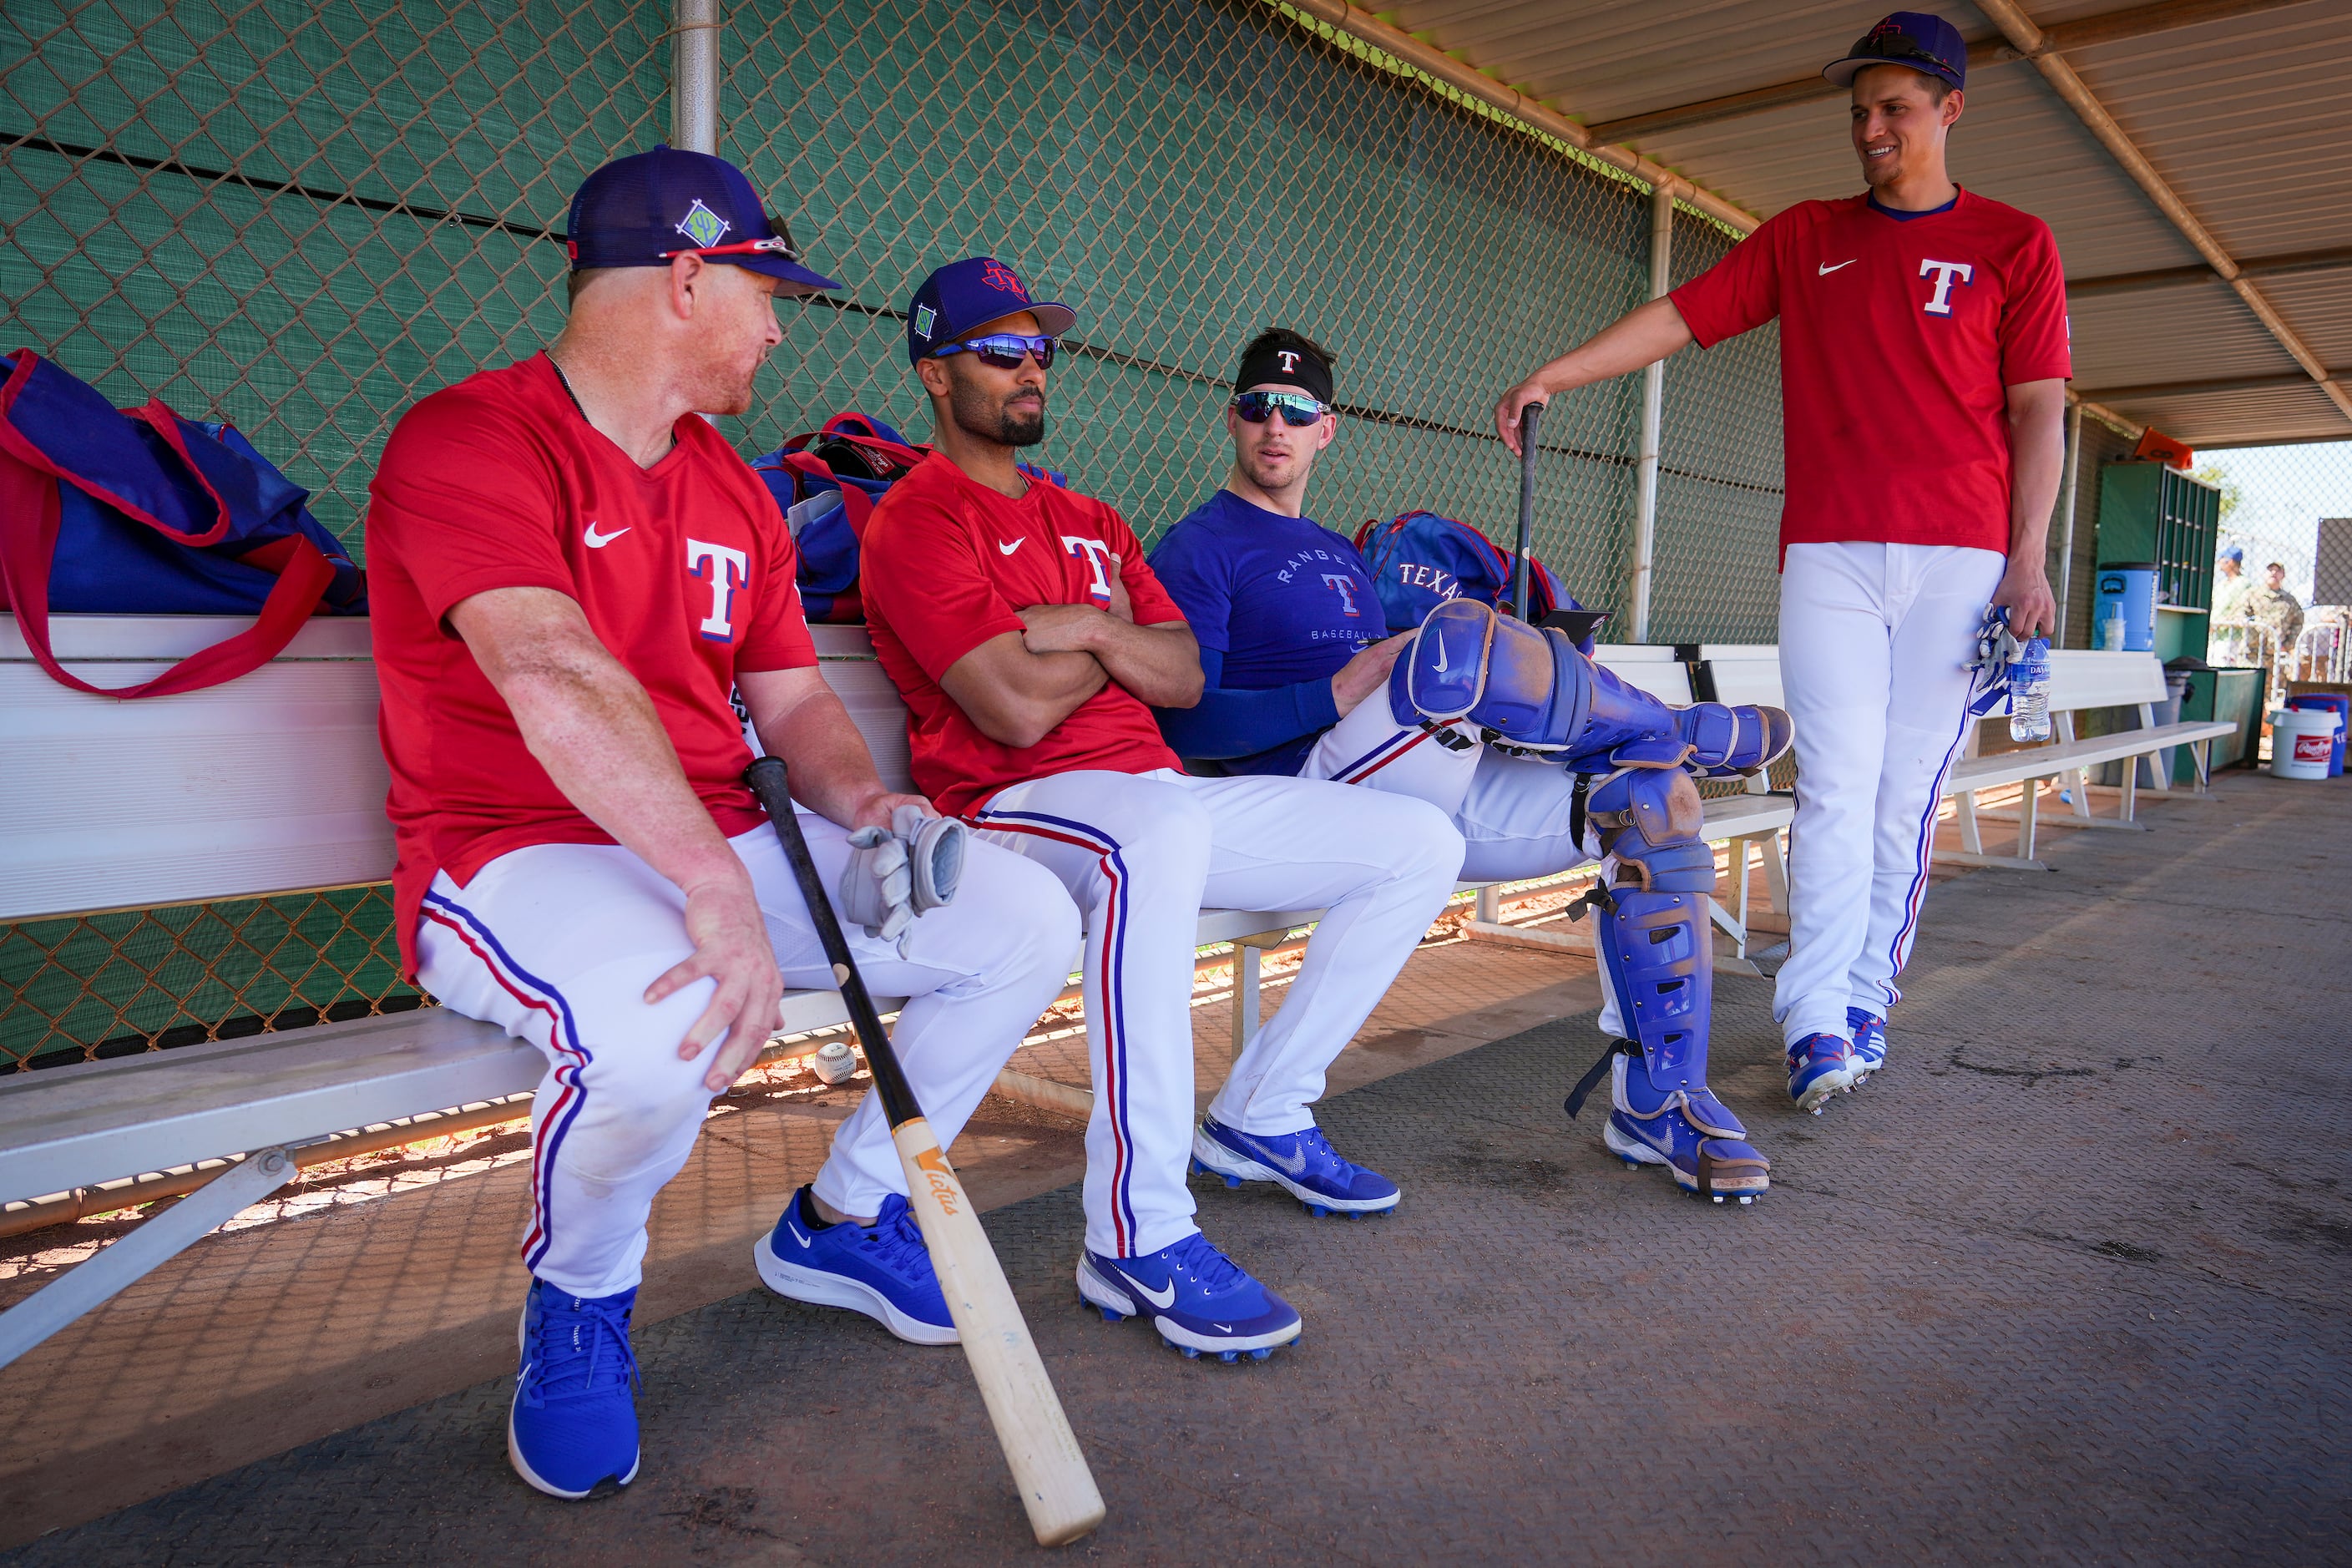 Rangers roundtable: What should happen in 2022 for this season to